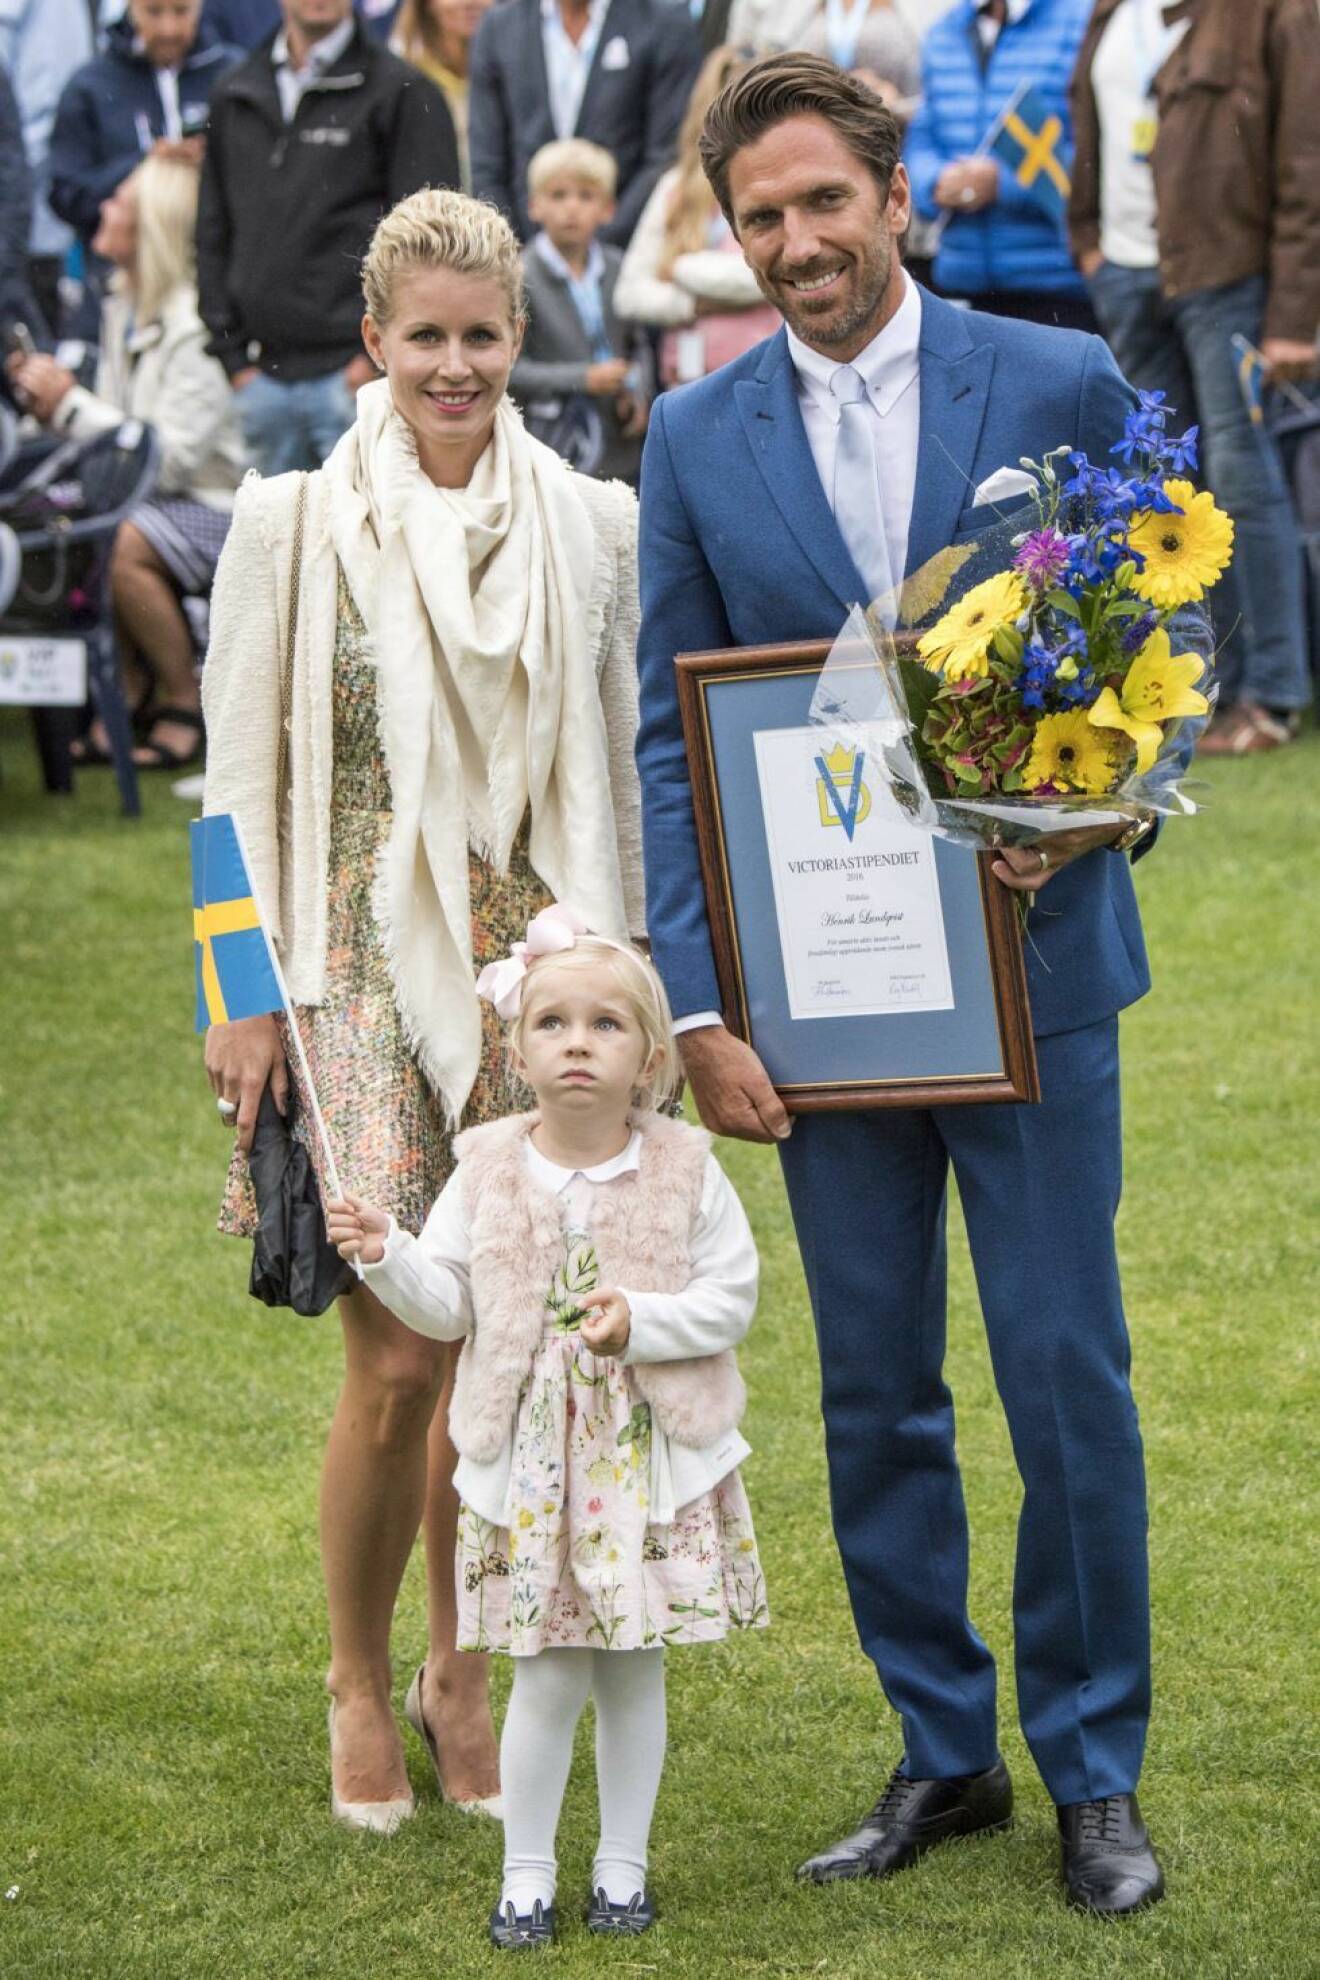 EJ ABO / XPBE <<< Therese Andersson, wife to Henrik Lundqvist and daughter Charlise. Henrik got the schollarship from Victoria. Pictures from Crown Princess Victorias birthday at Borgholms sports center on Oland. An evening with the whole swedish royal family who get to see entertainment on stage with Lisa Miskovsky, Charlotte Perrelli, Molly Pettersson Hammar, Jon Henrik Fjällgren, Loa falkman and Melodifestival winner Frans. Participants from the royal family was the King Carl Gustaf, Queen Silvia, Crown Princess Victoria, Princess Estelle, Prince Daniel, Prince Carl Philip, Princess Sofia, Princess Madeleine and Christopher ONeill. Borgholm, Oland, Sweden 2016-07-14 (c) Pelle T Nilsson/Stella Pictures